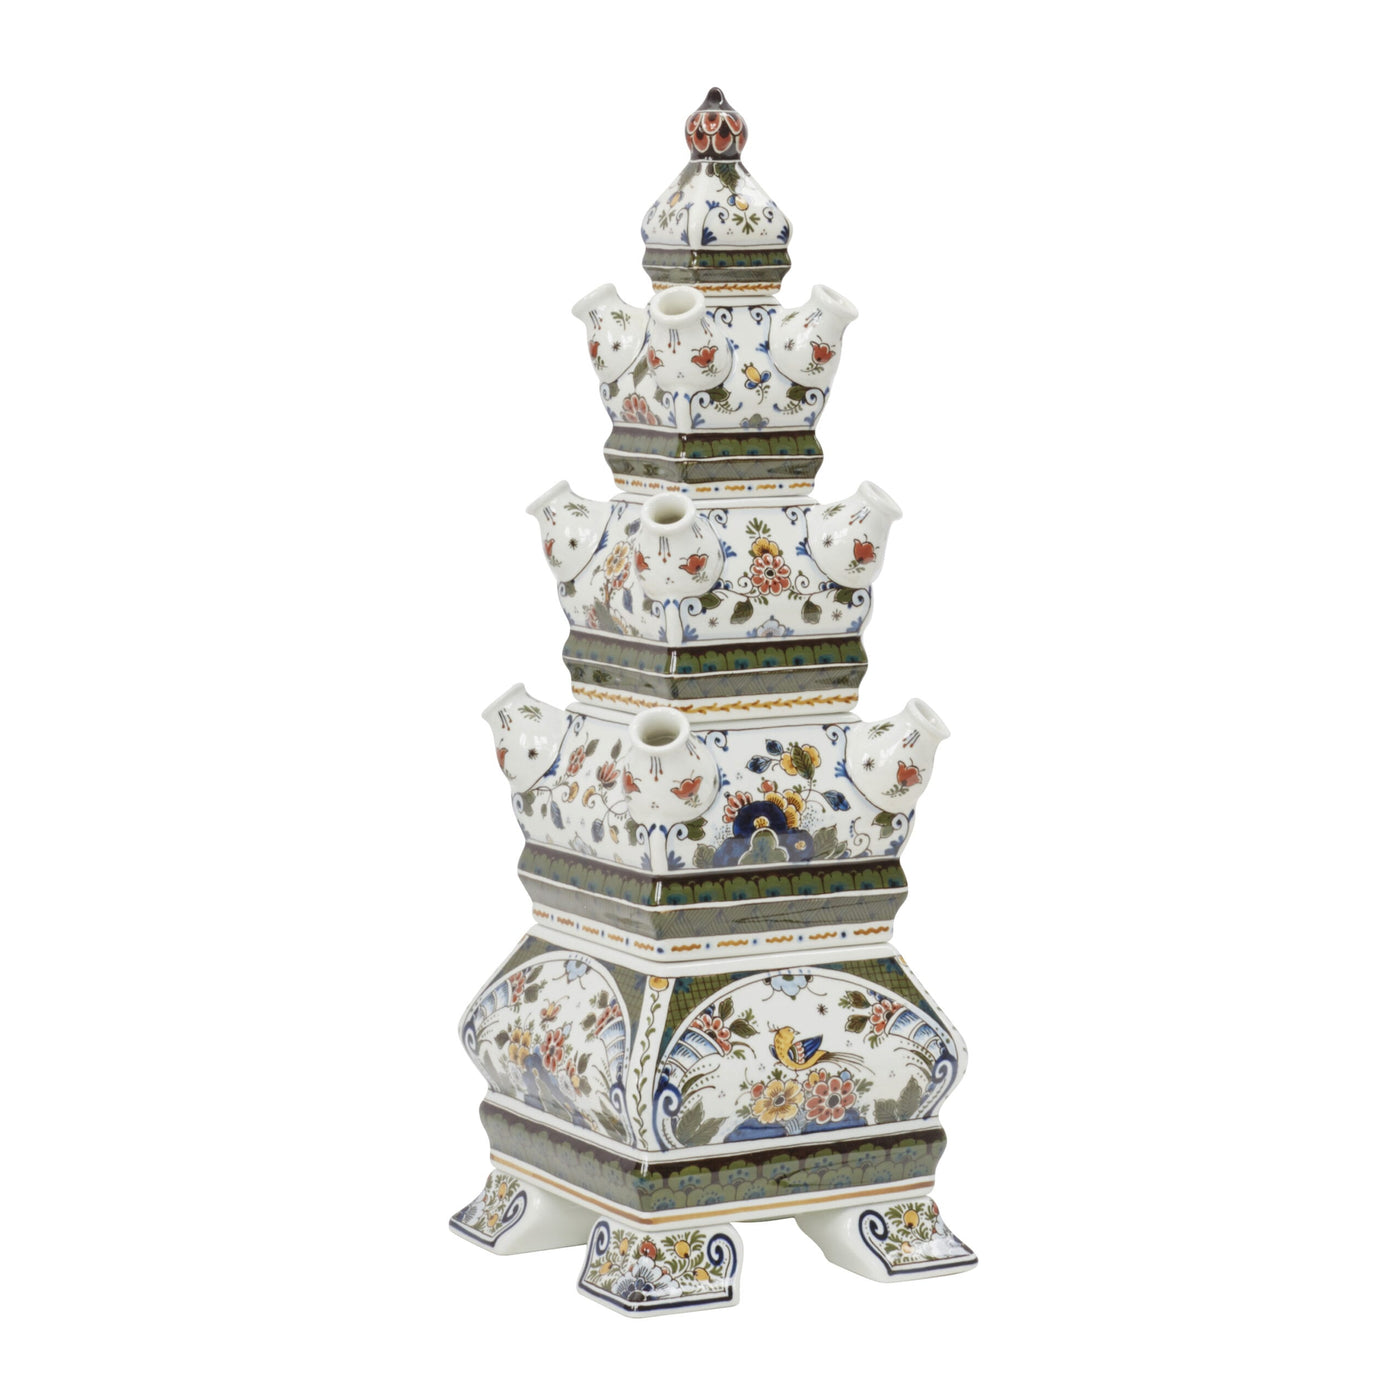 Products Tulip Vase Tablepiece Flower Pyramid Delft Polychrome Hand-Painted